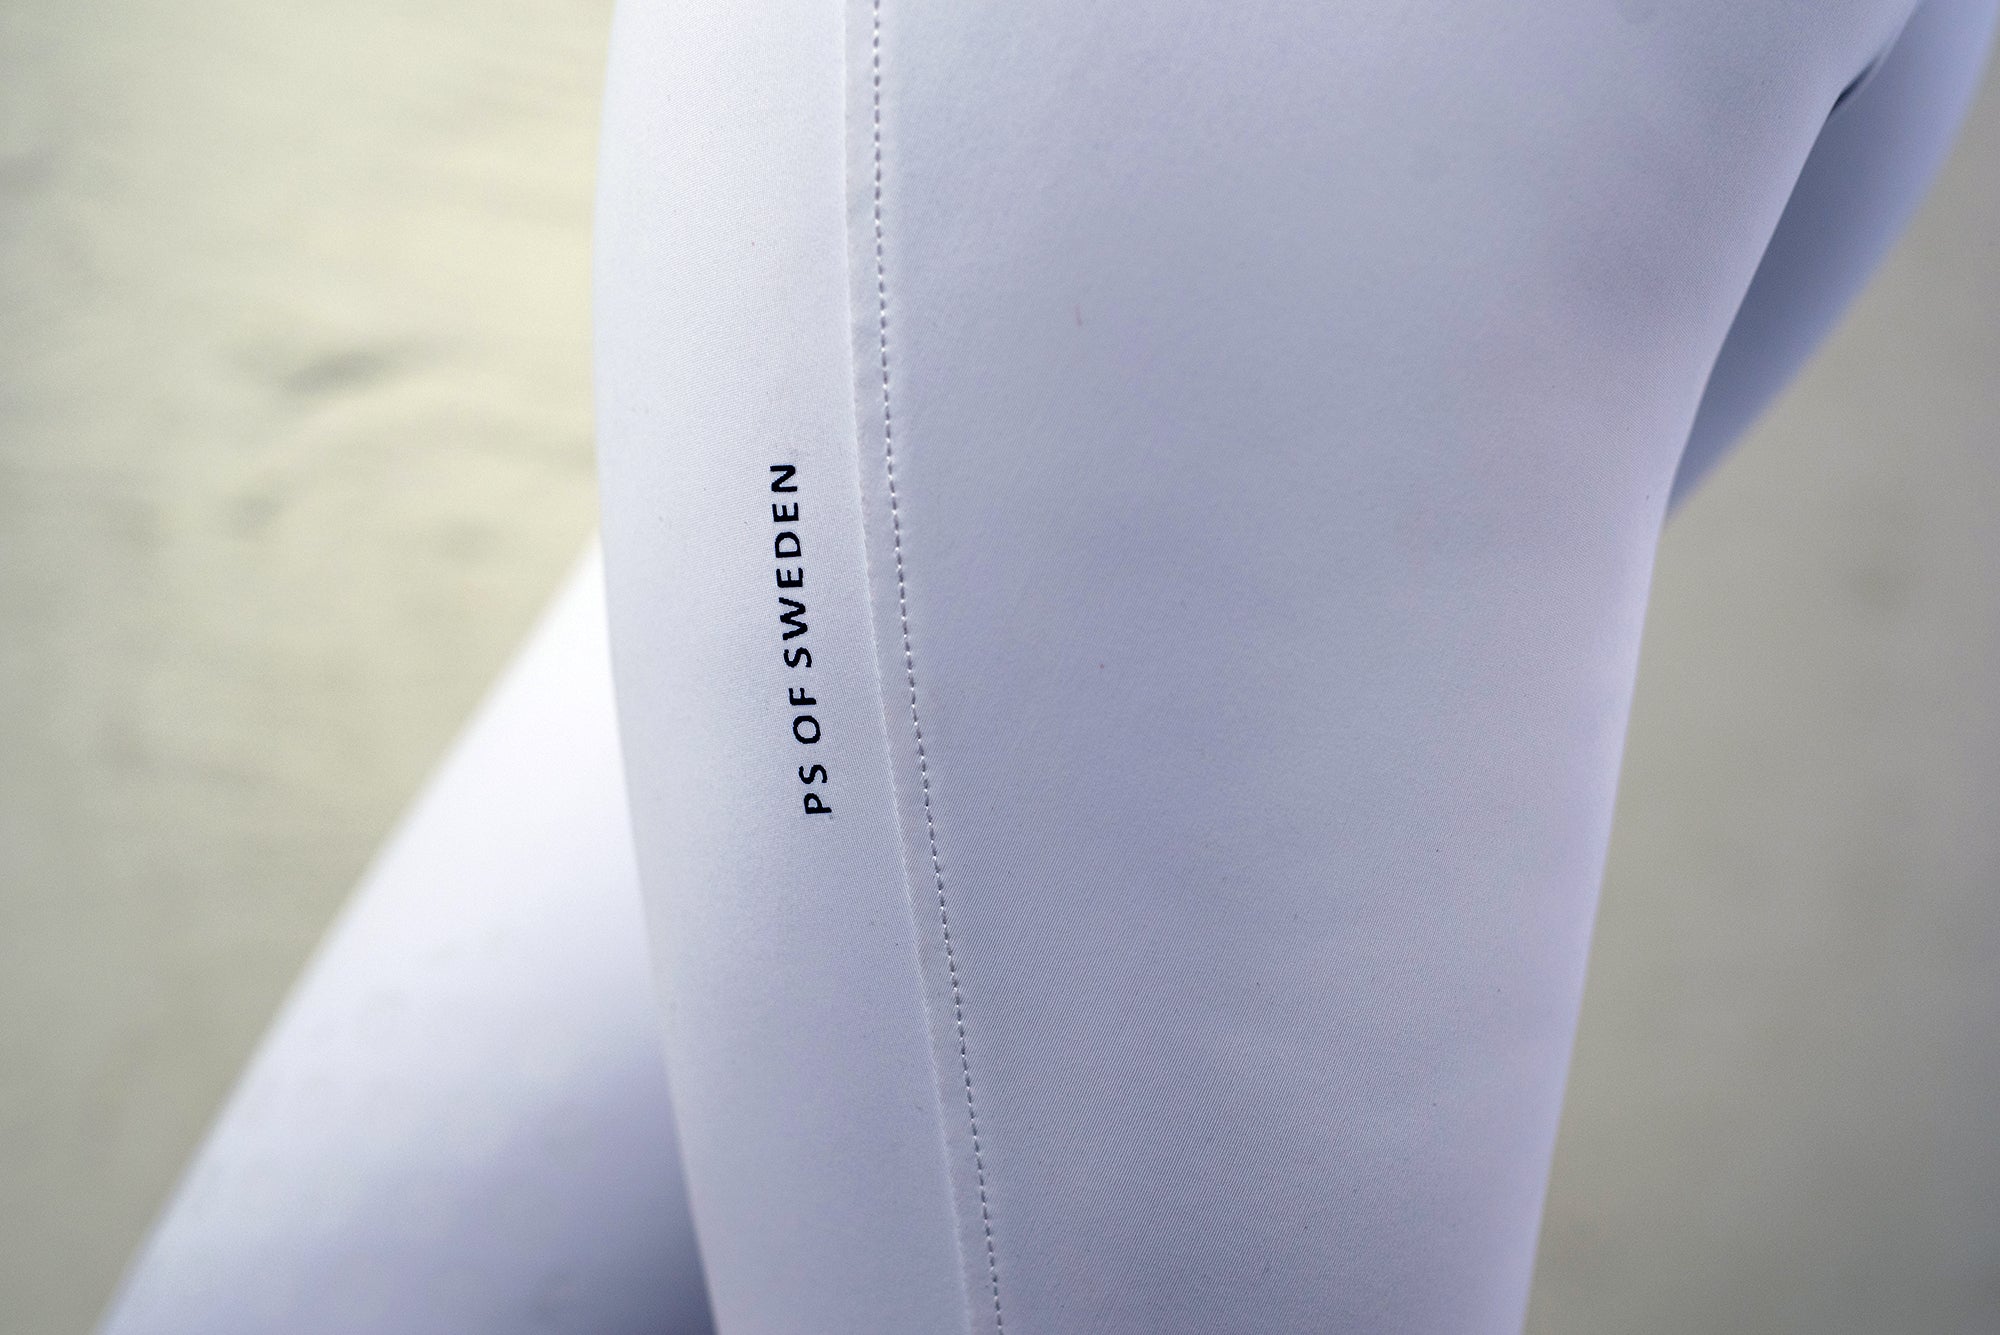 Figure shaped and stretchy breeches giving you maximal movability and the opportunity to perform on top at show jumping competitions. Non-seethrough 4-way-stretch that breathes and transports moisture away, elastic material at the ankles and mid-rise waist with loops. Grip in a pattern of the PS emblem decorates the breeches, together with back pocket imitations with PS buttons.